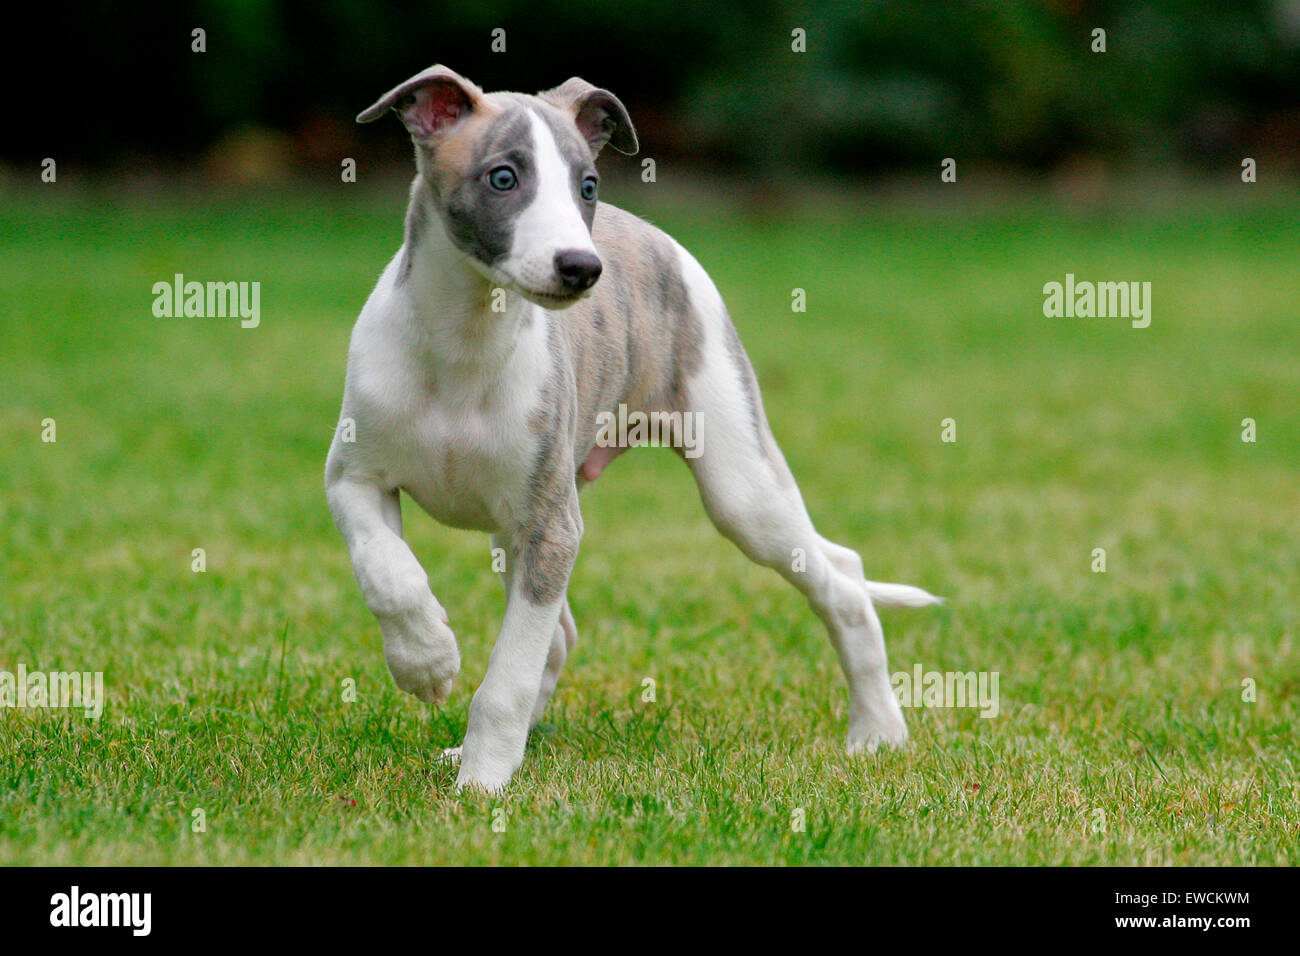 English Whippet. Puppy walking on a lawn. Germany Stock Photo